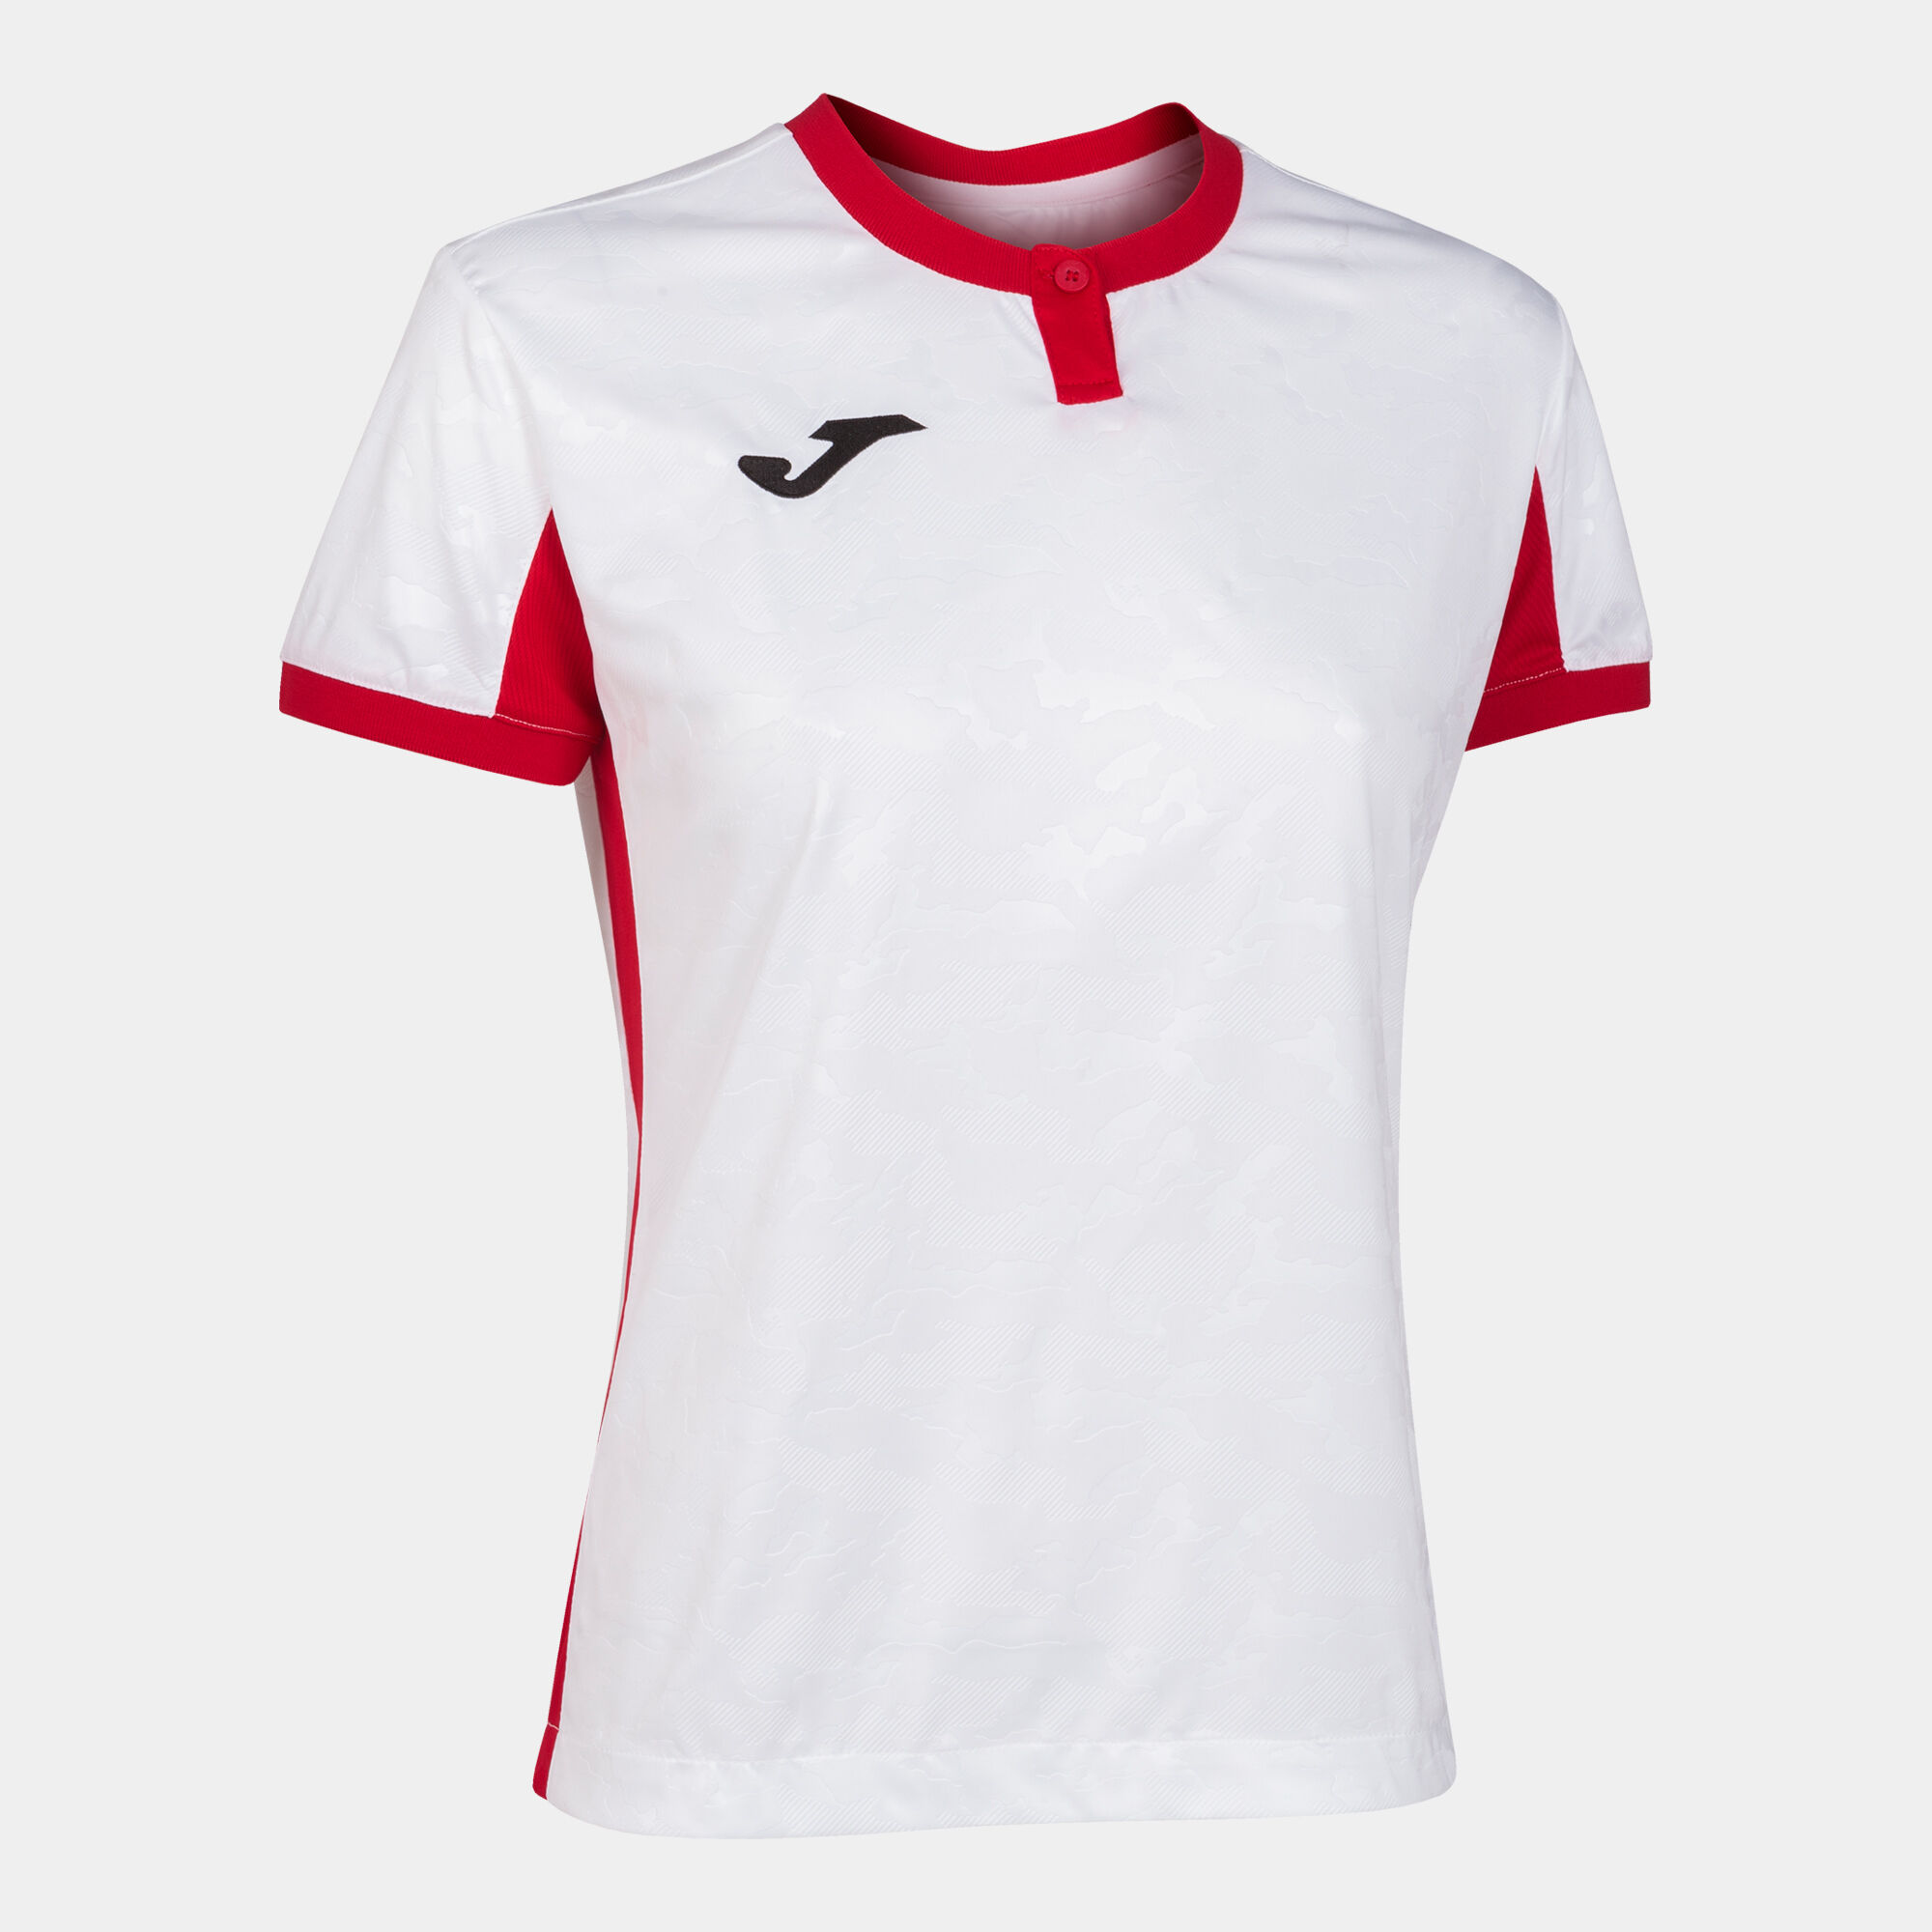 SHIRT SHORT SLEEVE WOMAN TOLETUM II WHITE RED